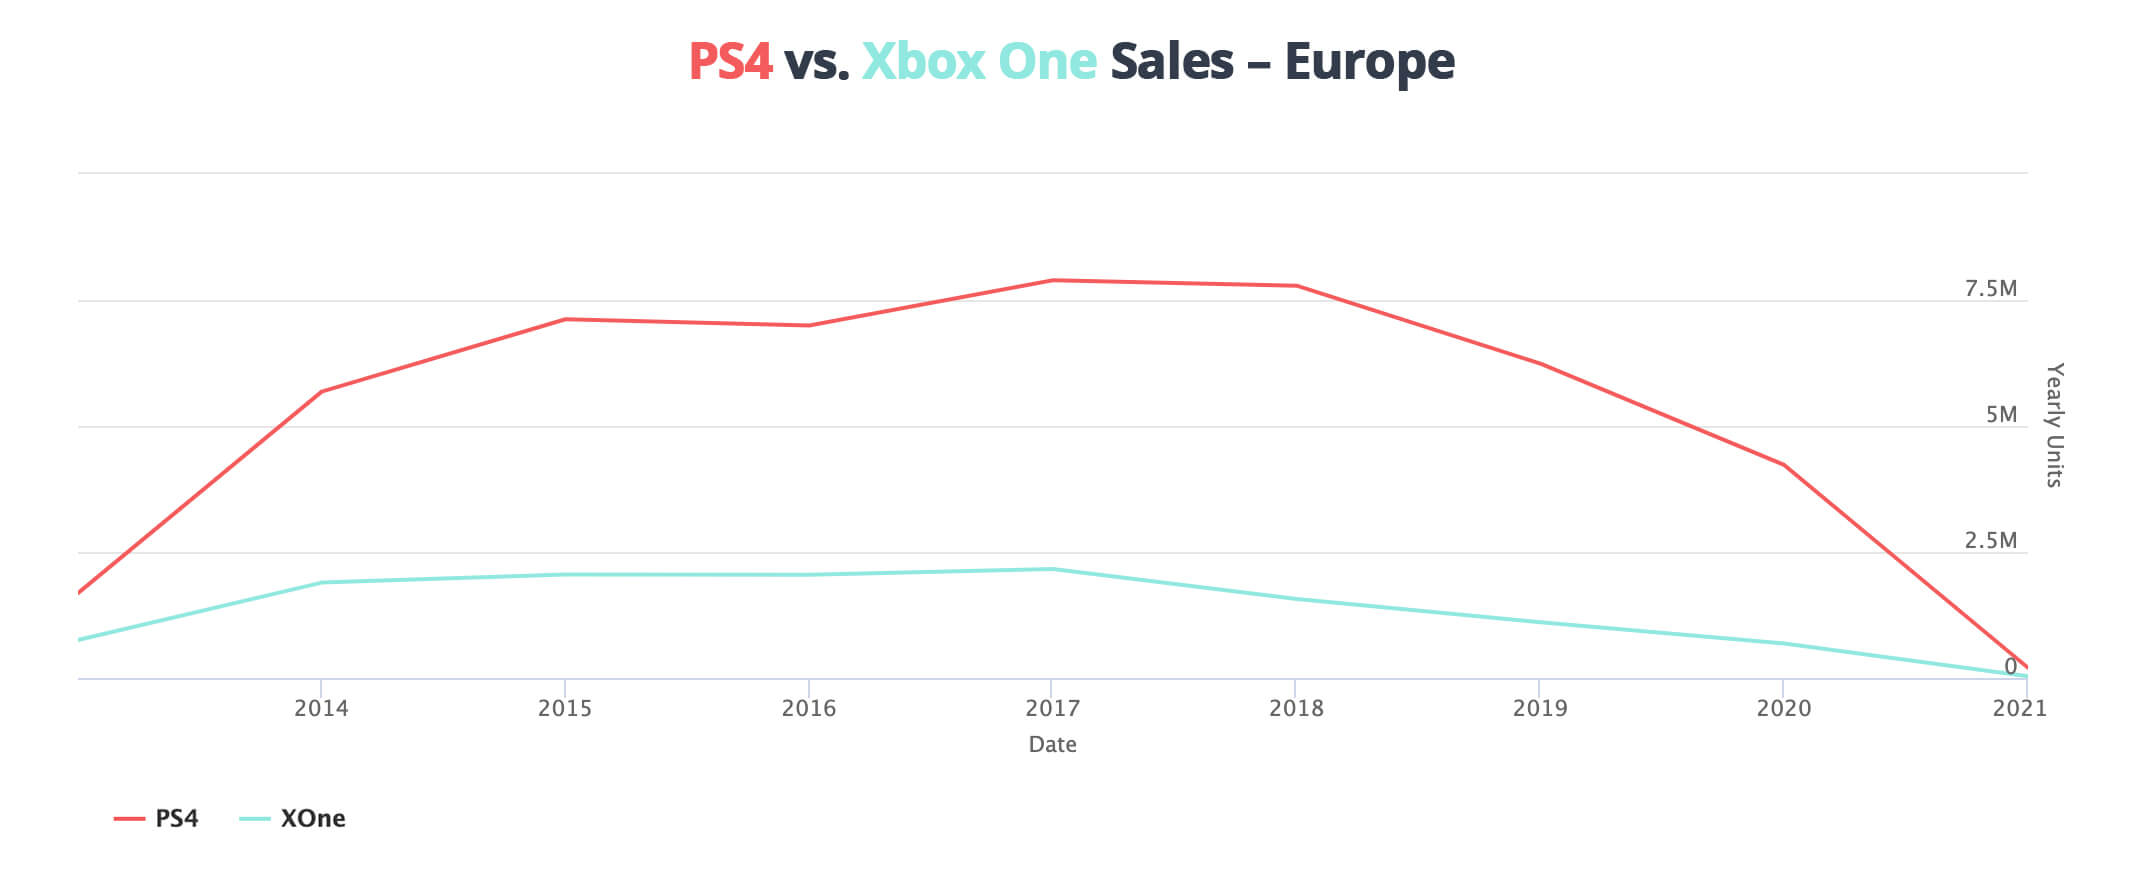 Europe-ps4-sales-compared-to-xbox-one-sales